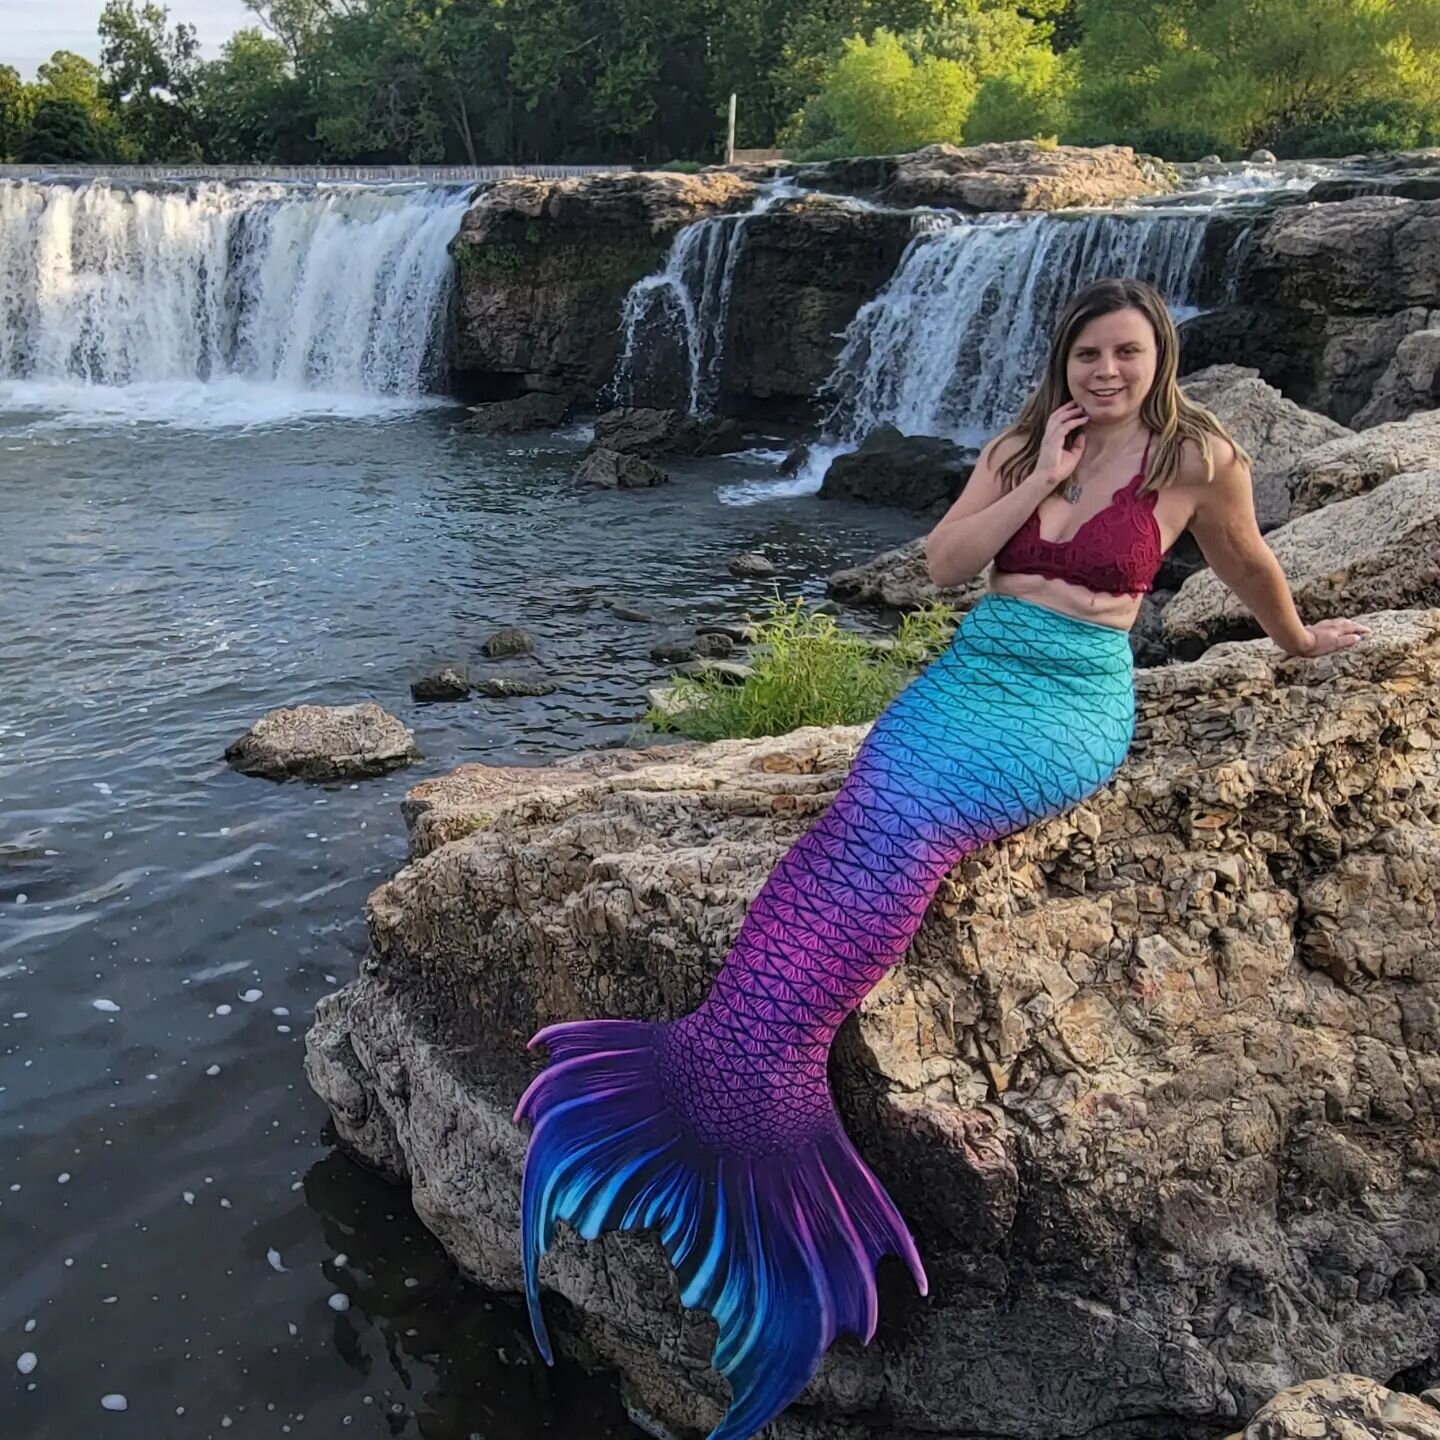 It's officially been one week since completing my journey to Arizona! I'm almost settled in and adjusting to the heat! Here's a few highlights from my journey, including an impromptu photoshoot at Great Falls in Joplin, MO, paddle boarding Lake Erie 